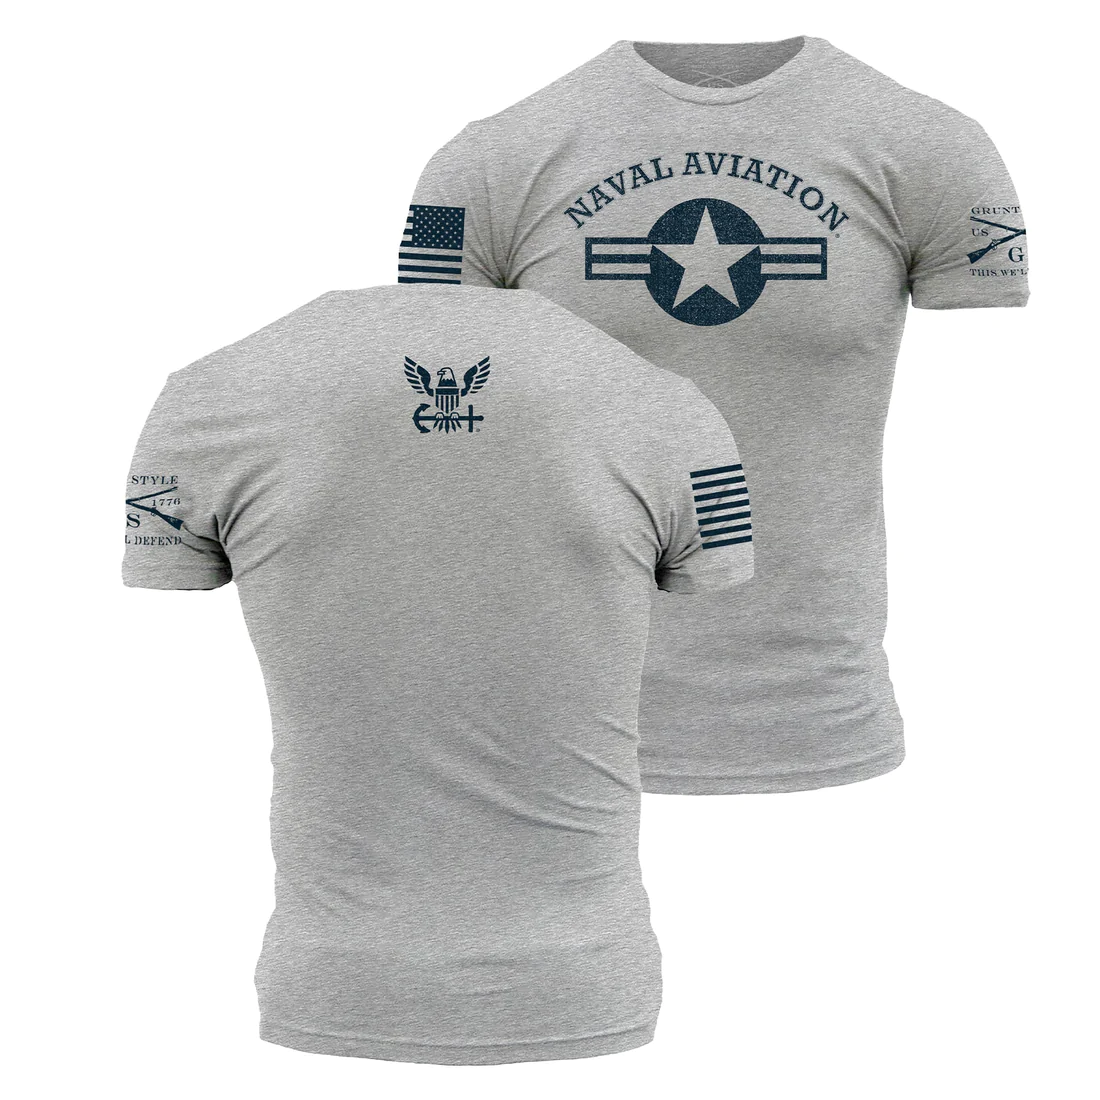 Grunt Style Men's USN Naval Aviation Tee posted by ProdOrigin USA in Men's Apparel